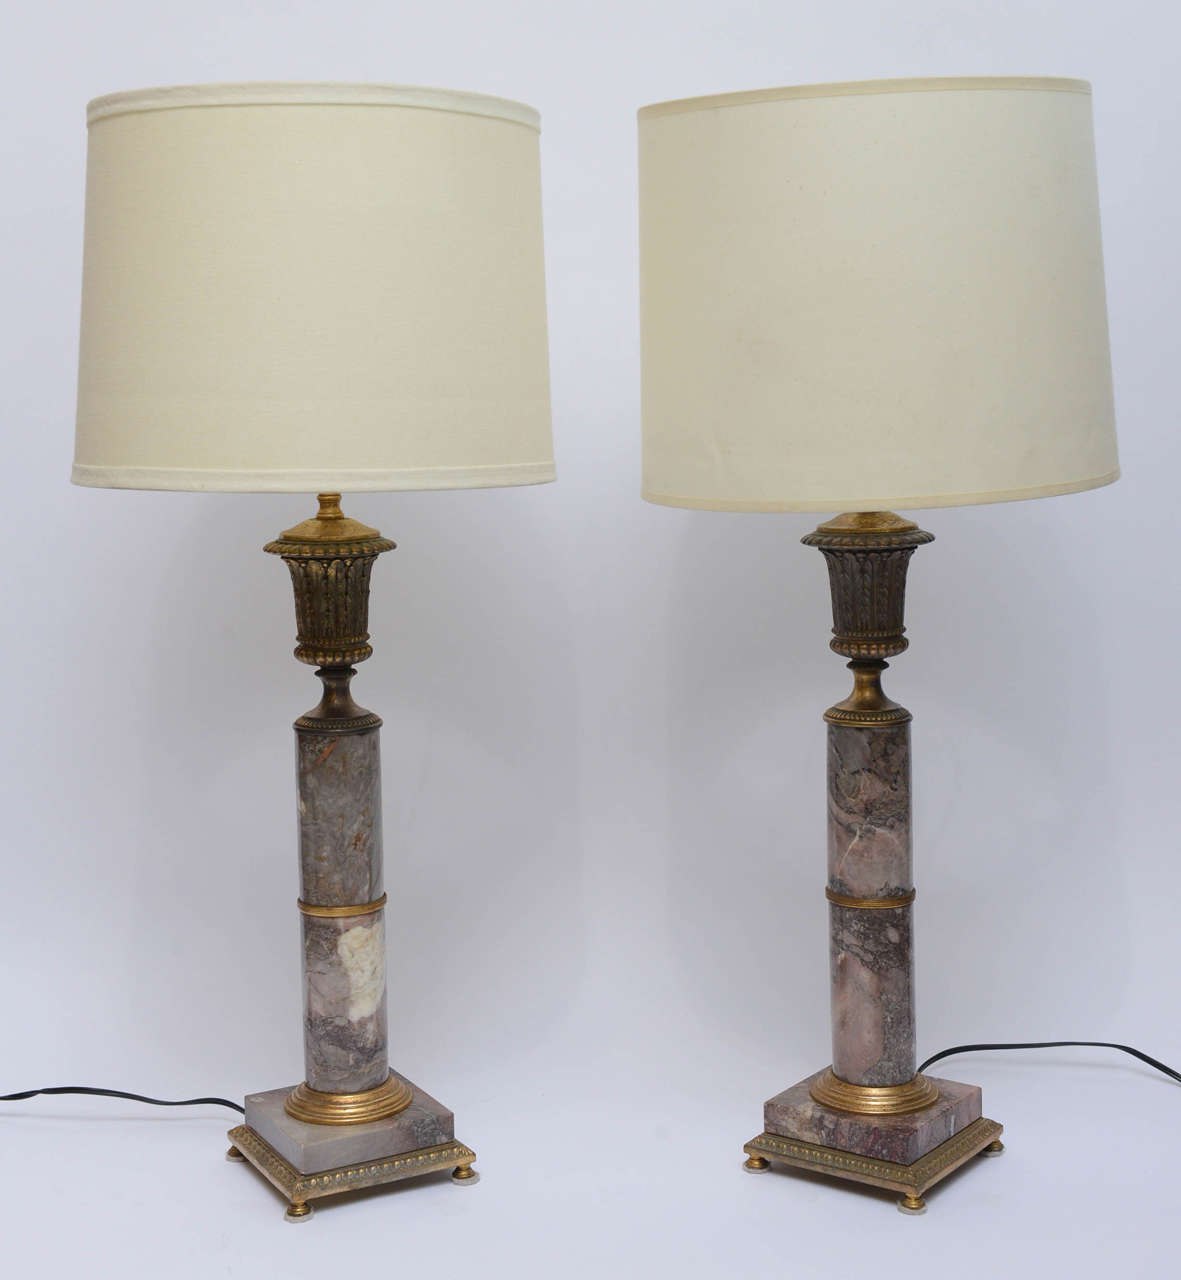 Very Elegant 2 tones Marble & Bronze Table Lamps from Italy.